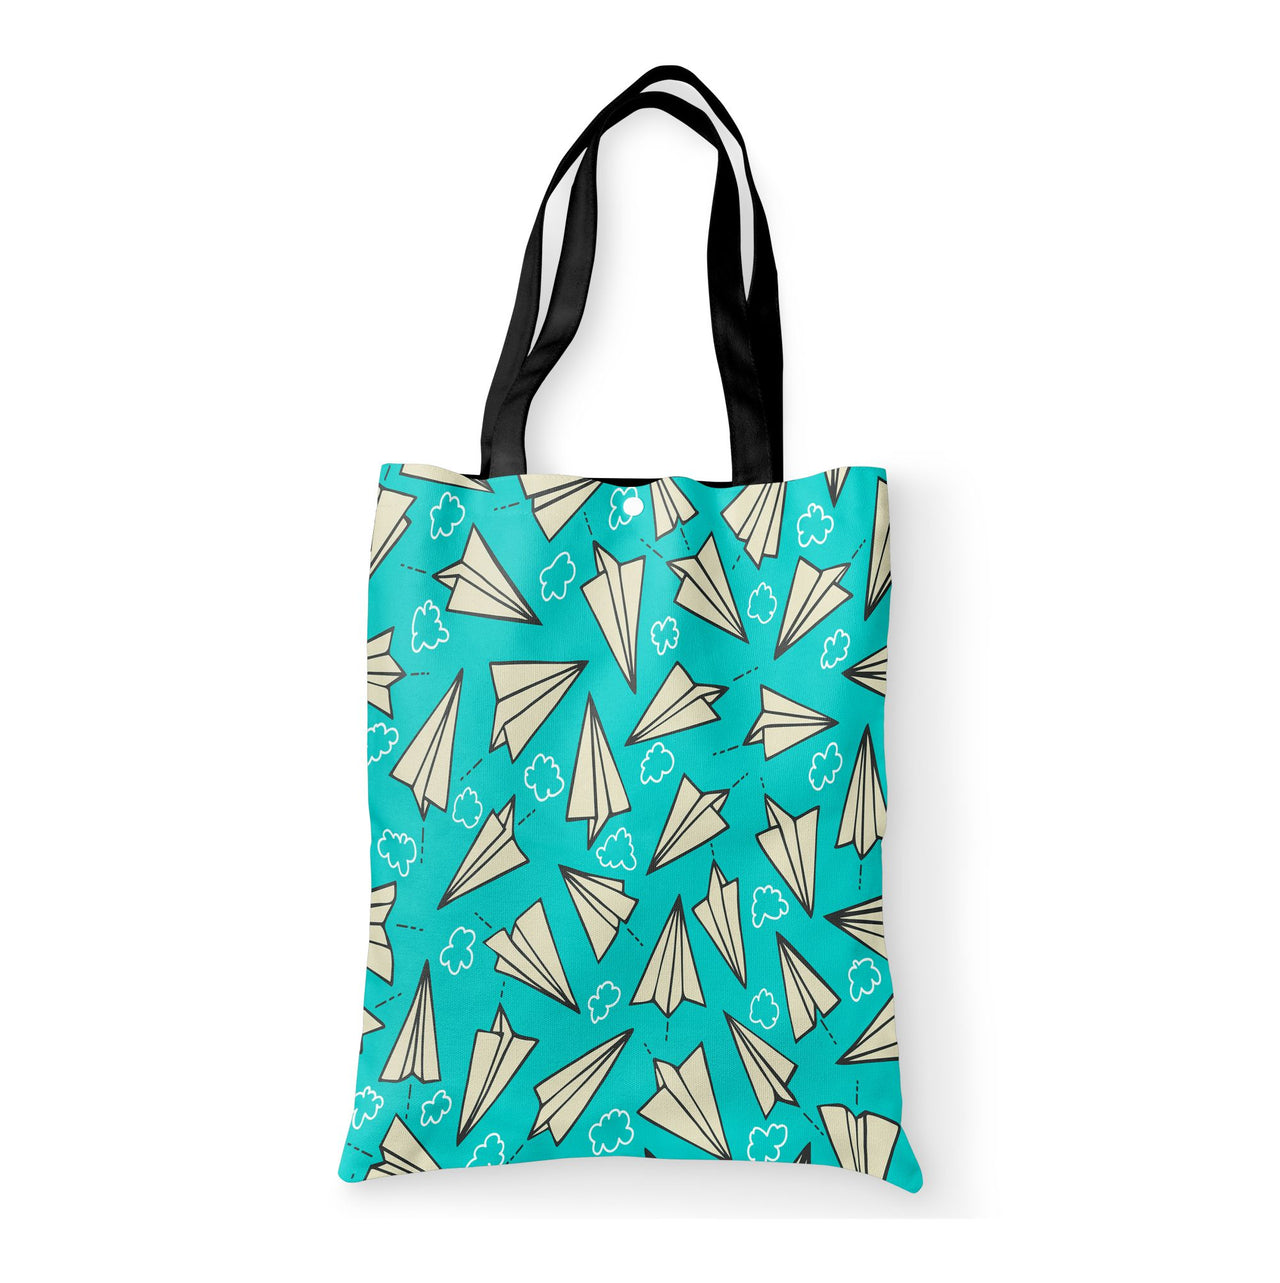 Super Cool Paper Airplanes Designed Tote Bags